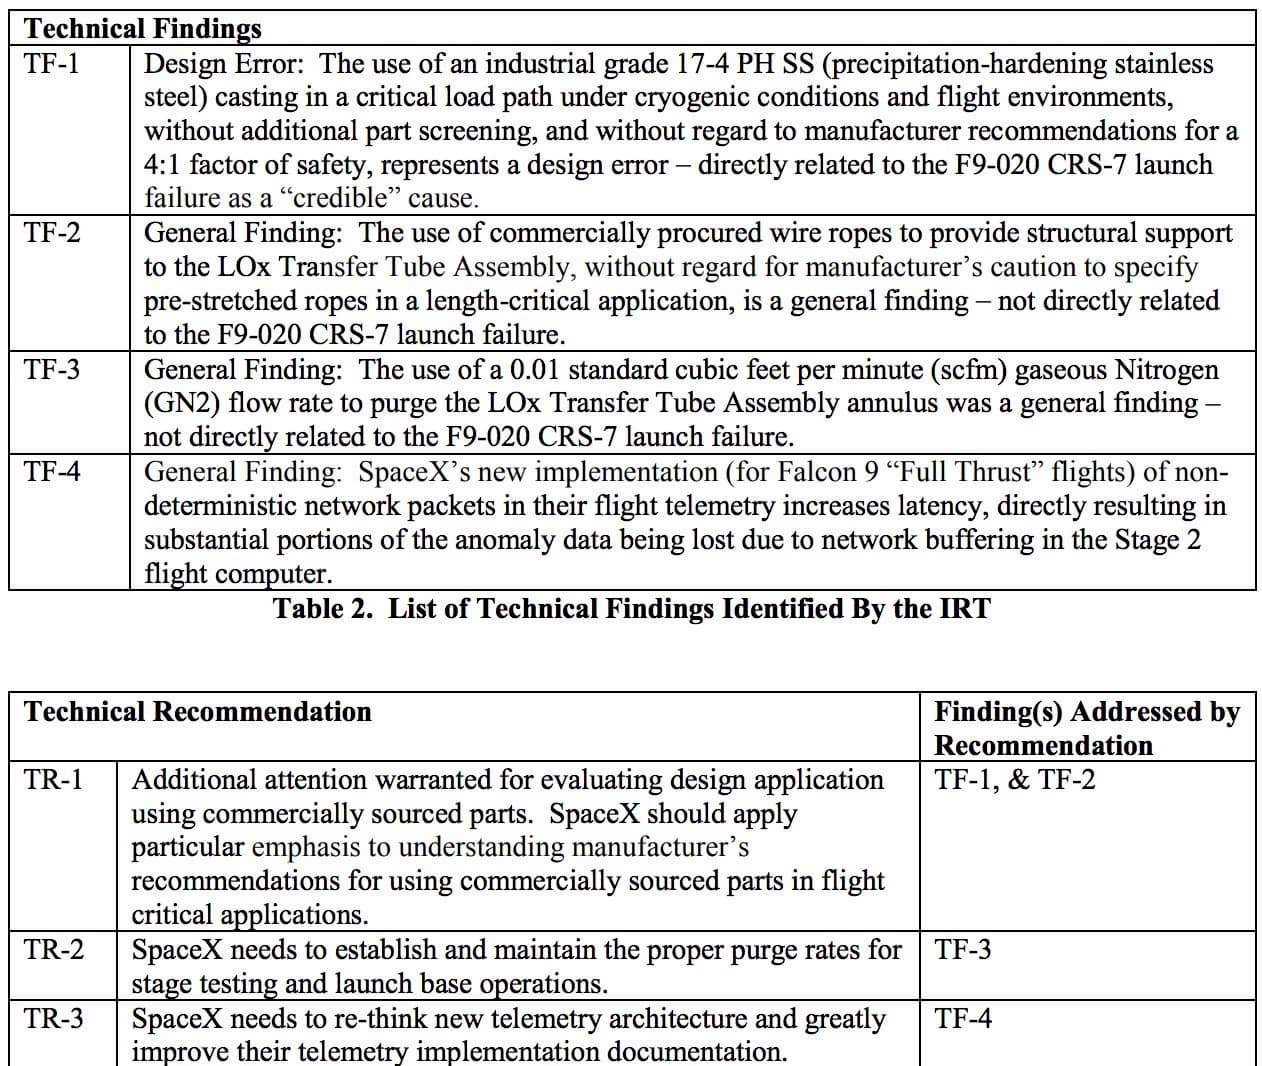 Table Excerpt from the CRS-7 Incident Report, citing a design error as the lead cause of the accident.